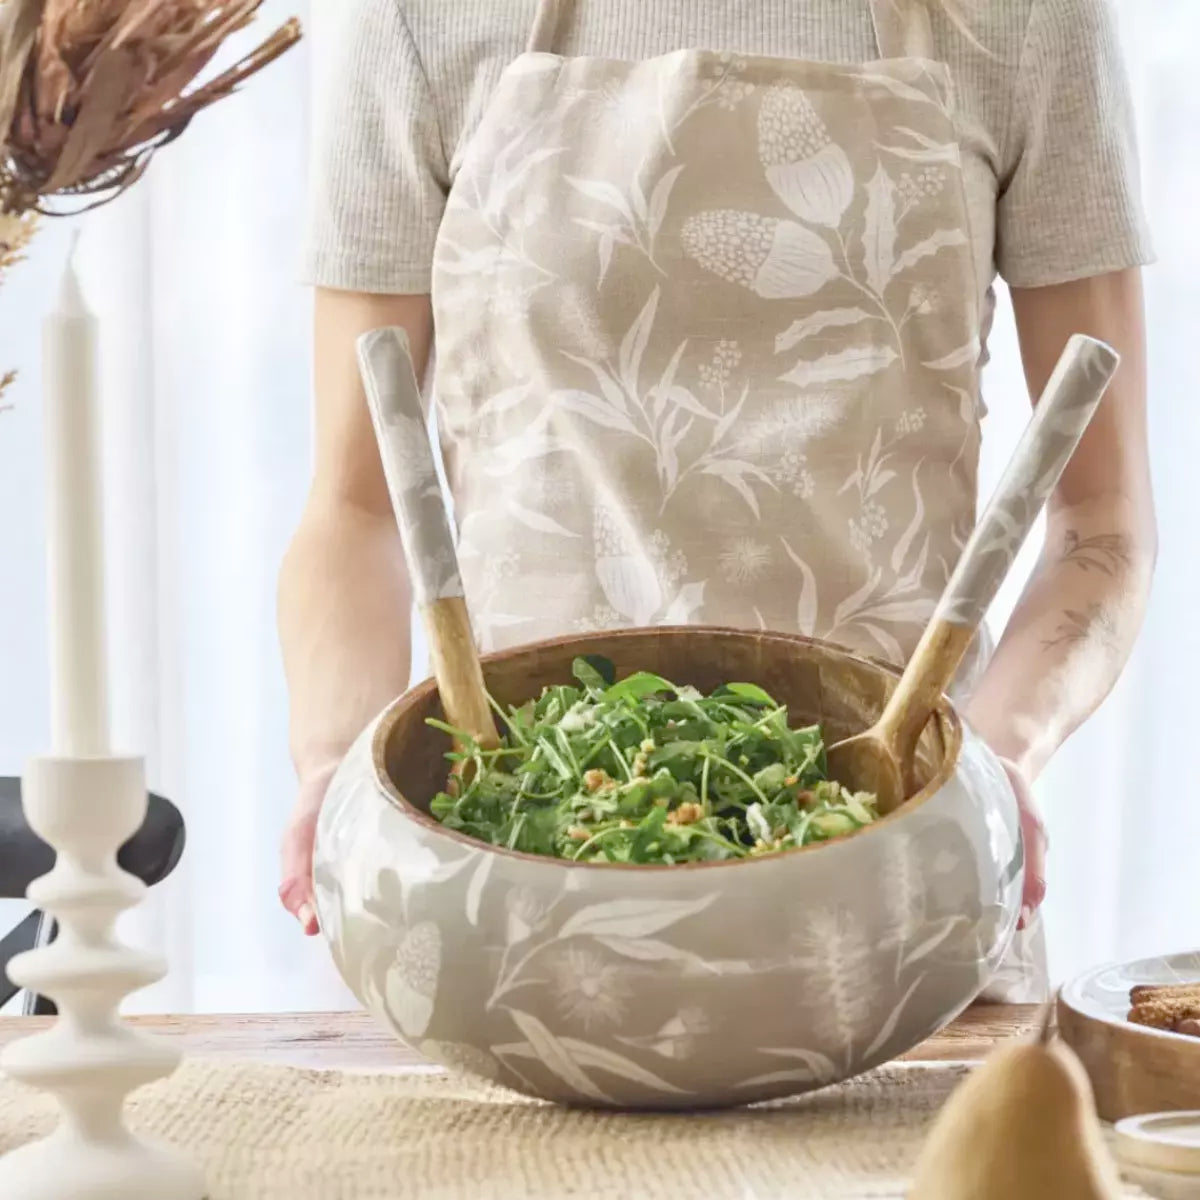 A woman in an apron holding a bowl of Bindi salad inspired by native flora from Australia as part of the j.elliot Collection.